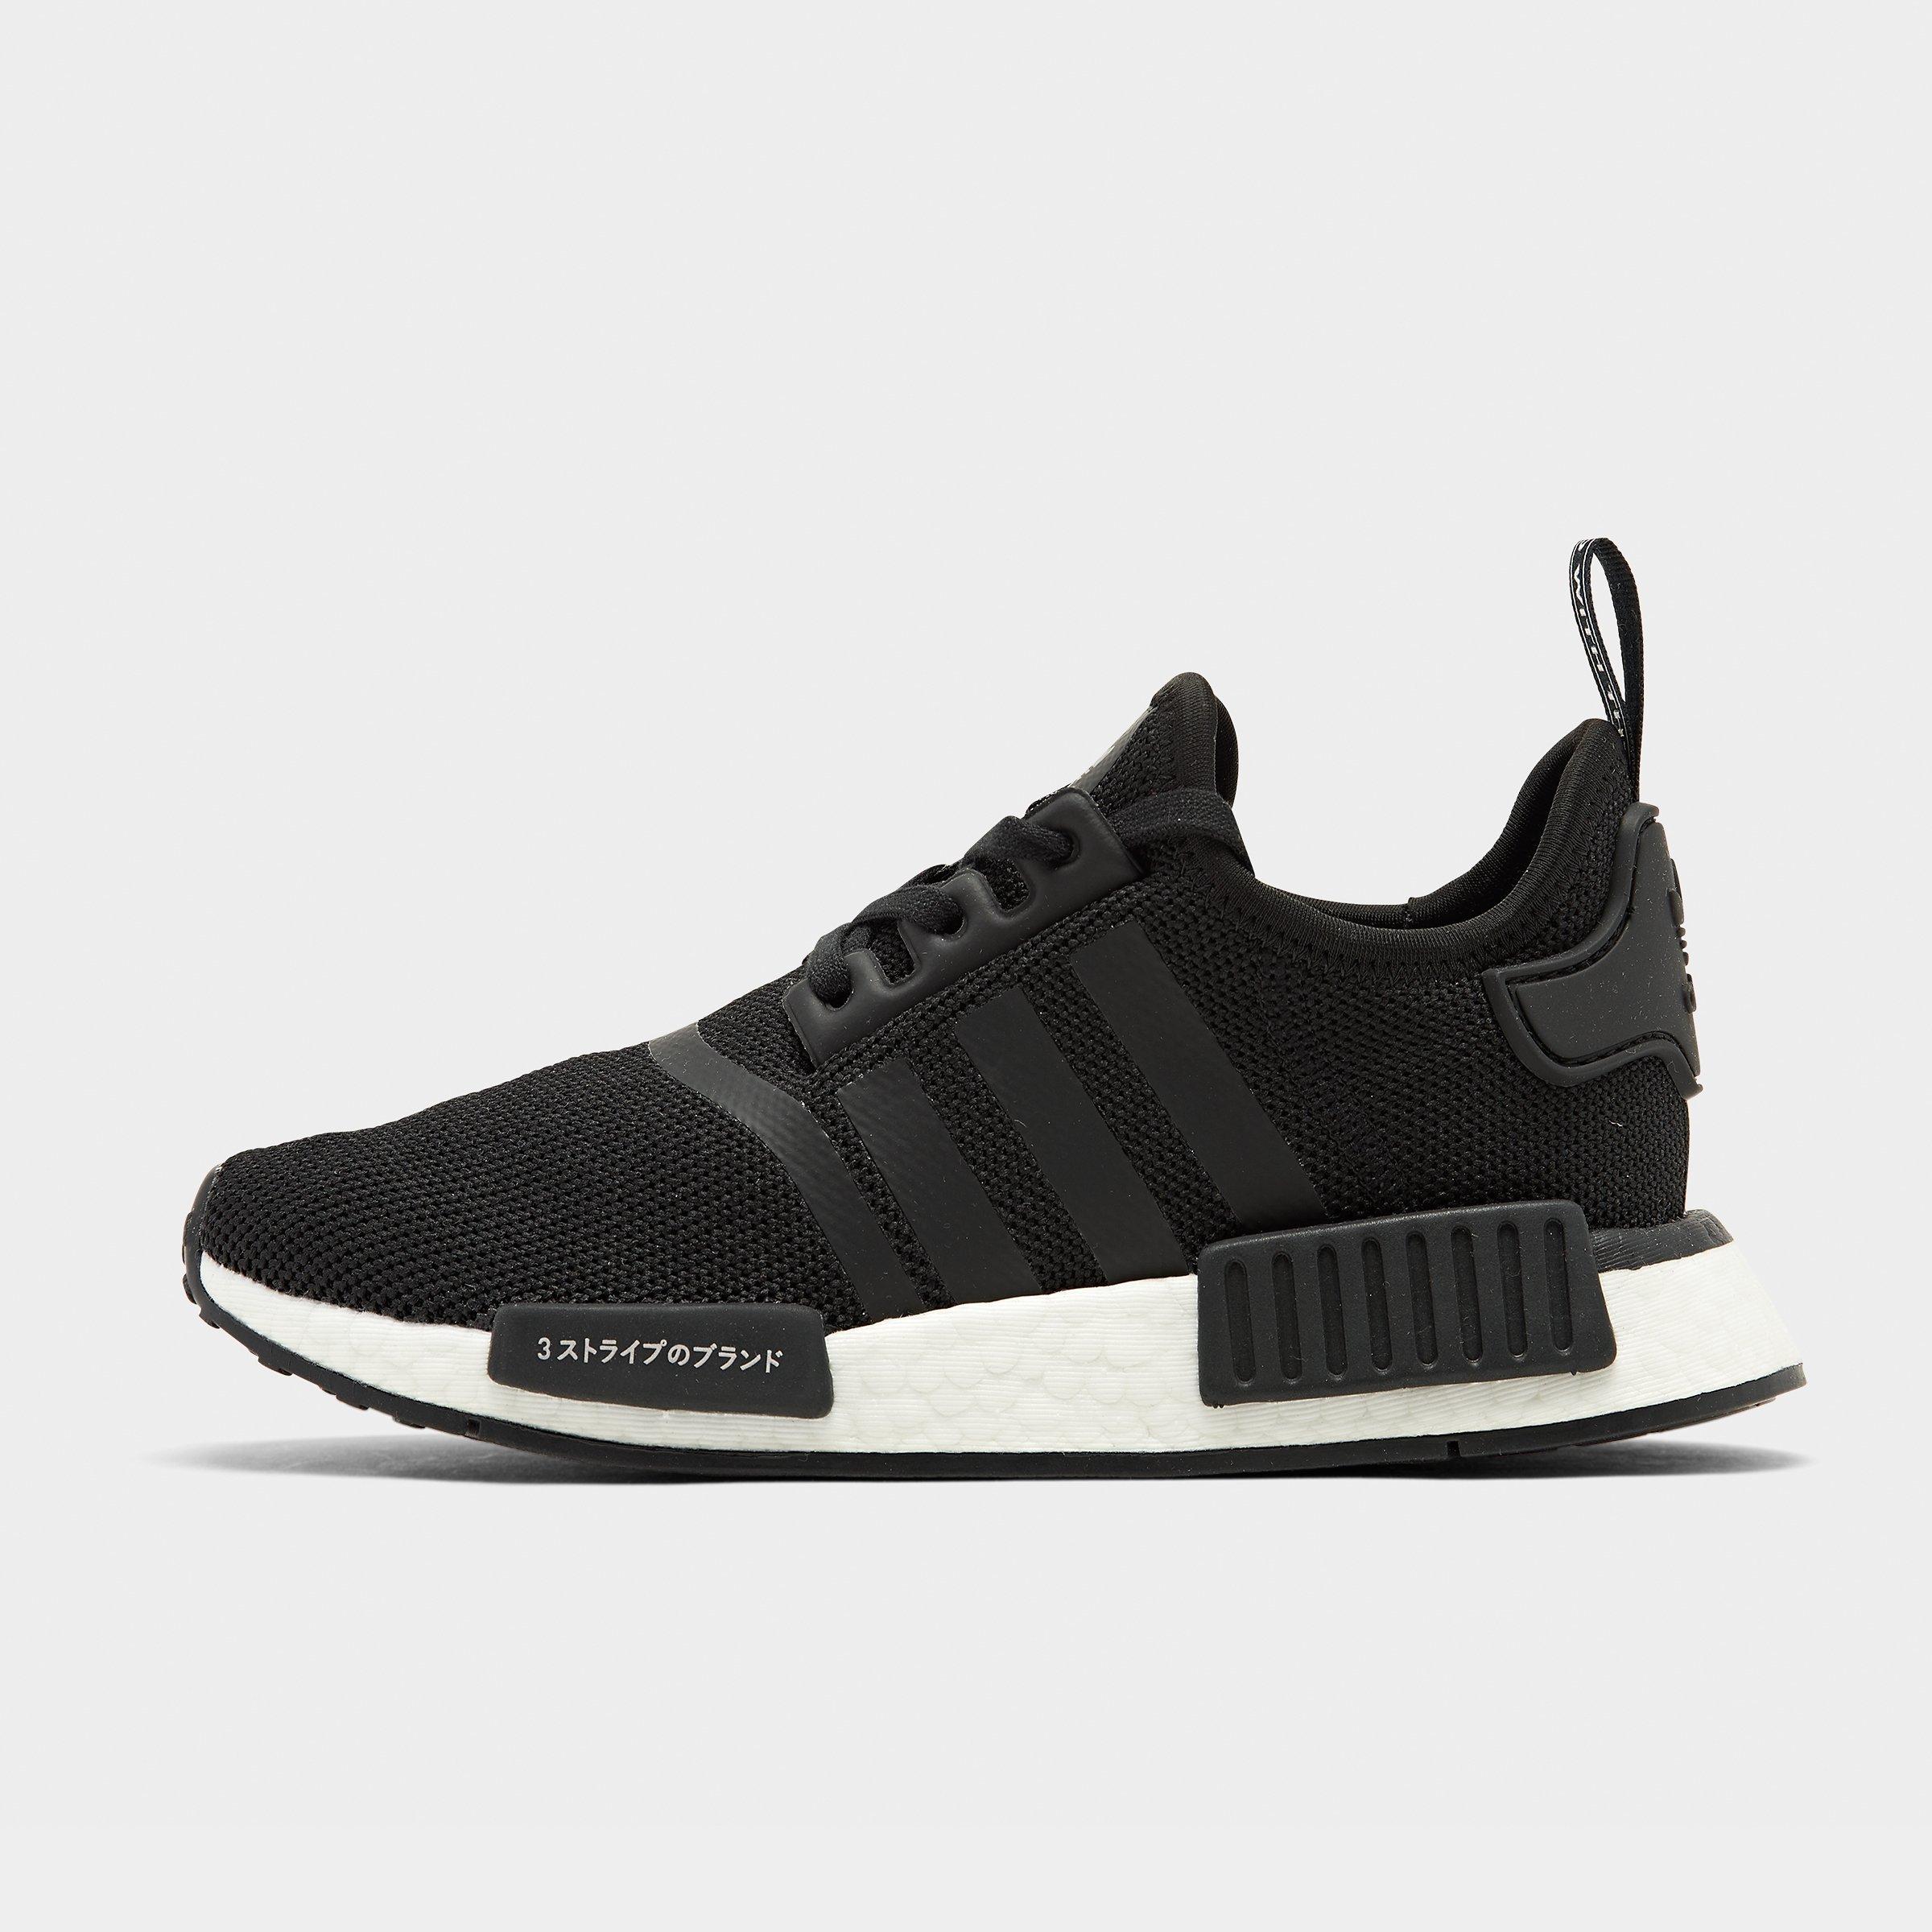 Adidas NMD XR1 Black Red Footlocker Exclusive Where T.